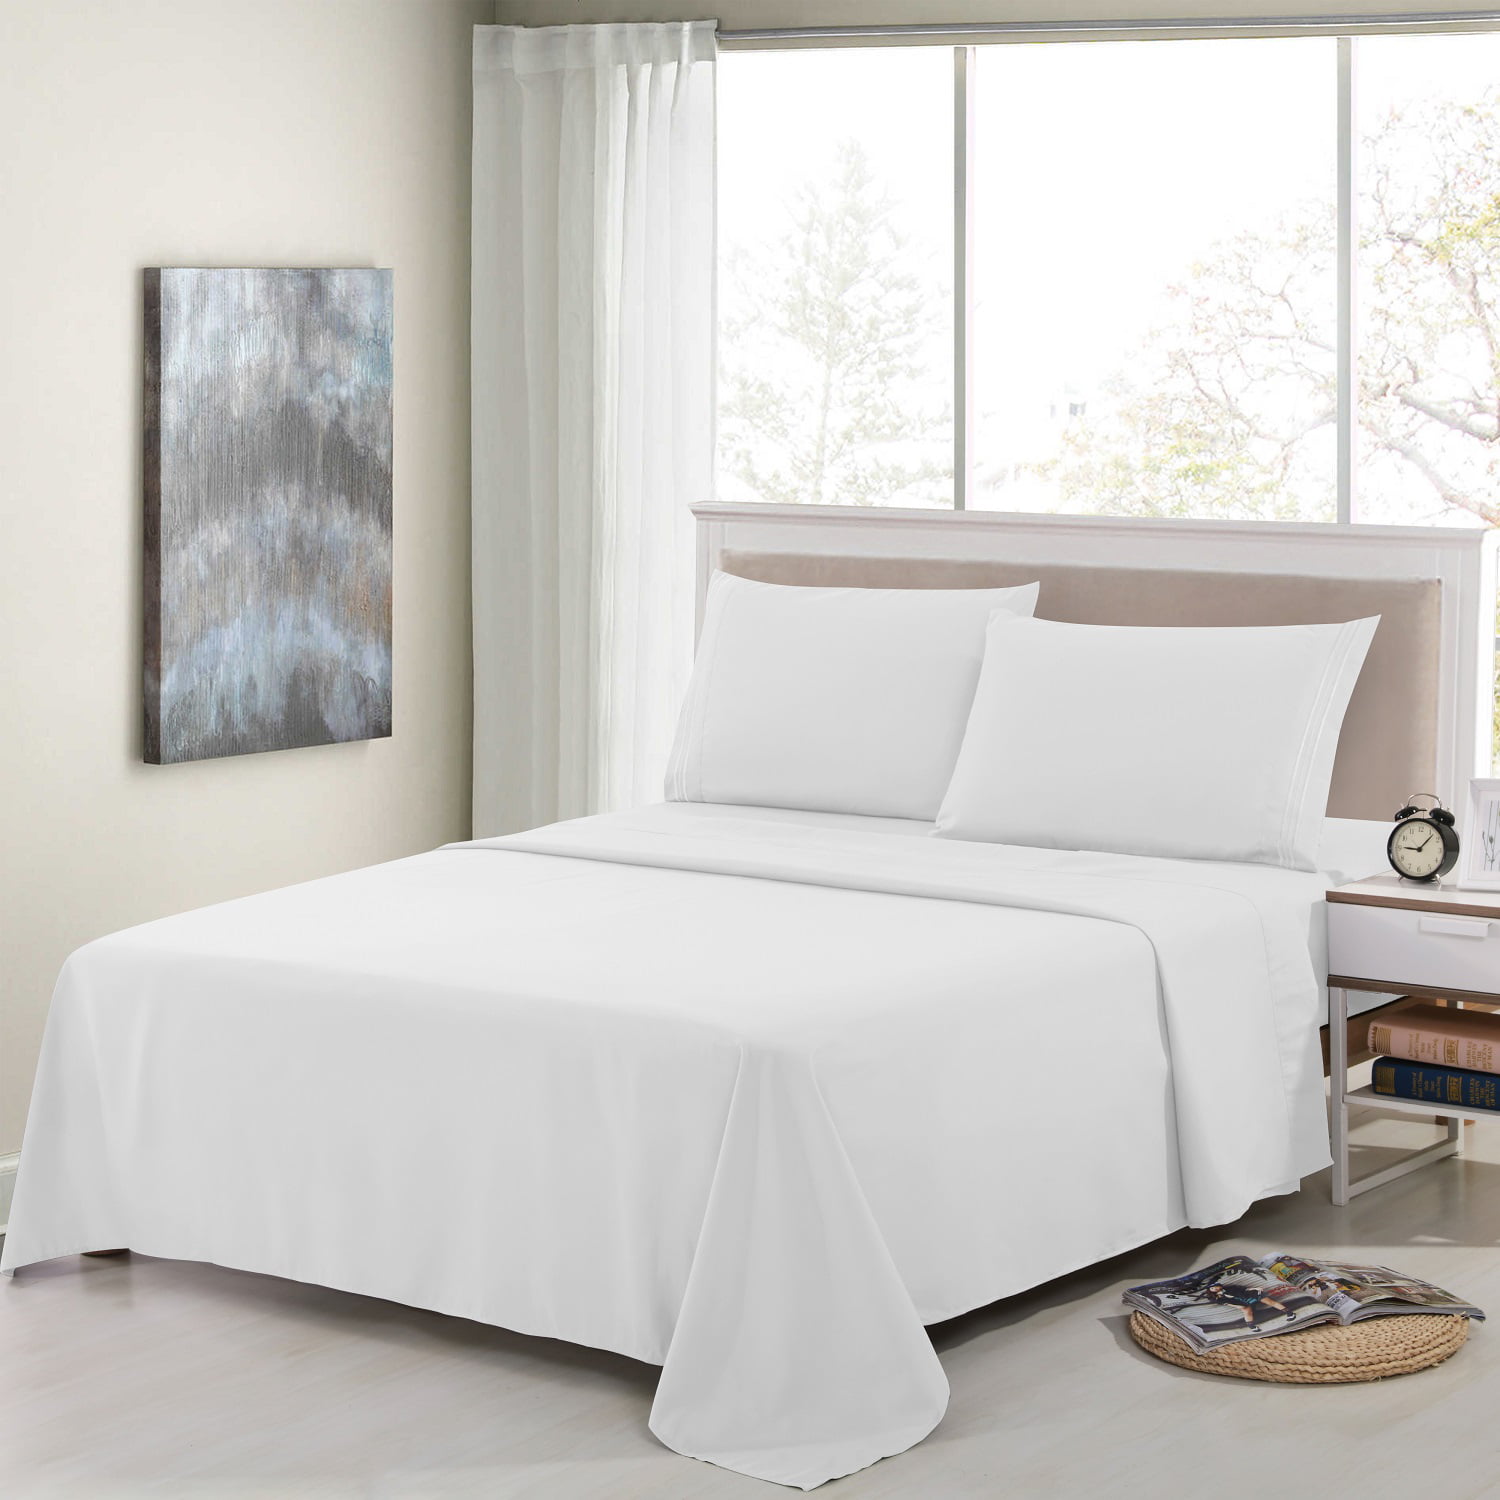 6 Piece Bedding Sheets For Queen Bed Deep Pocket Fitted Queen Sheets White Bed Sheets Walmart